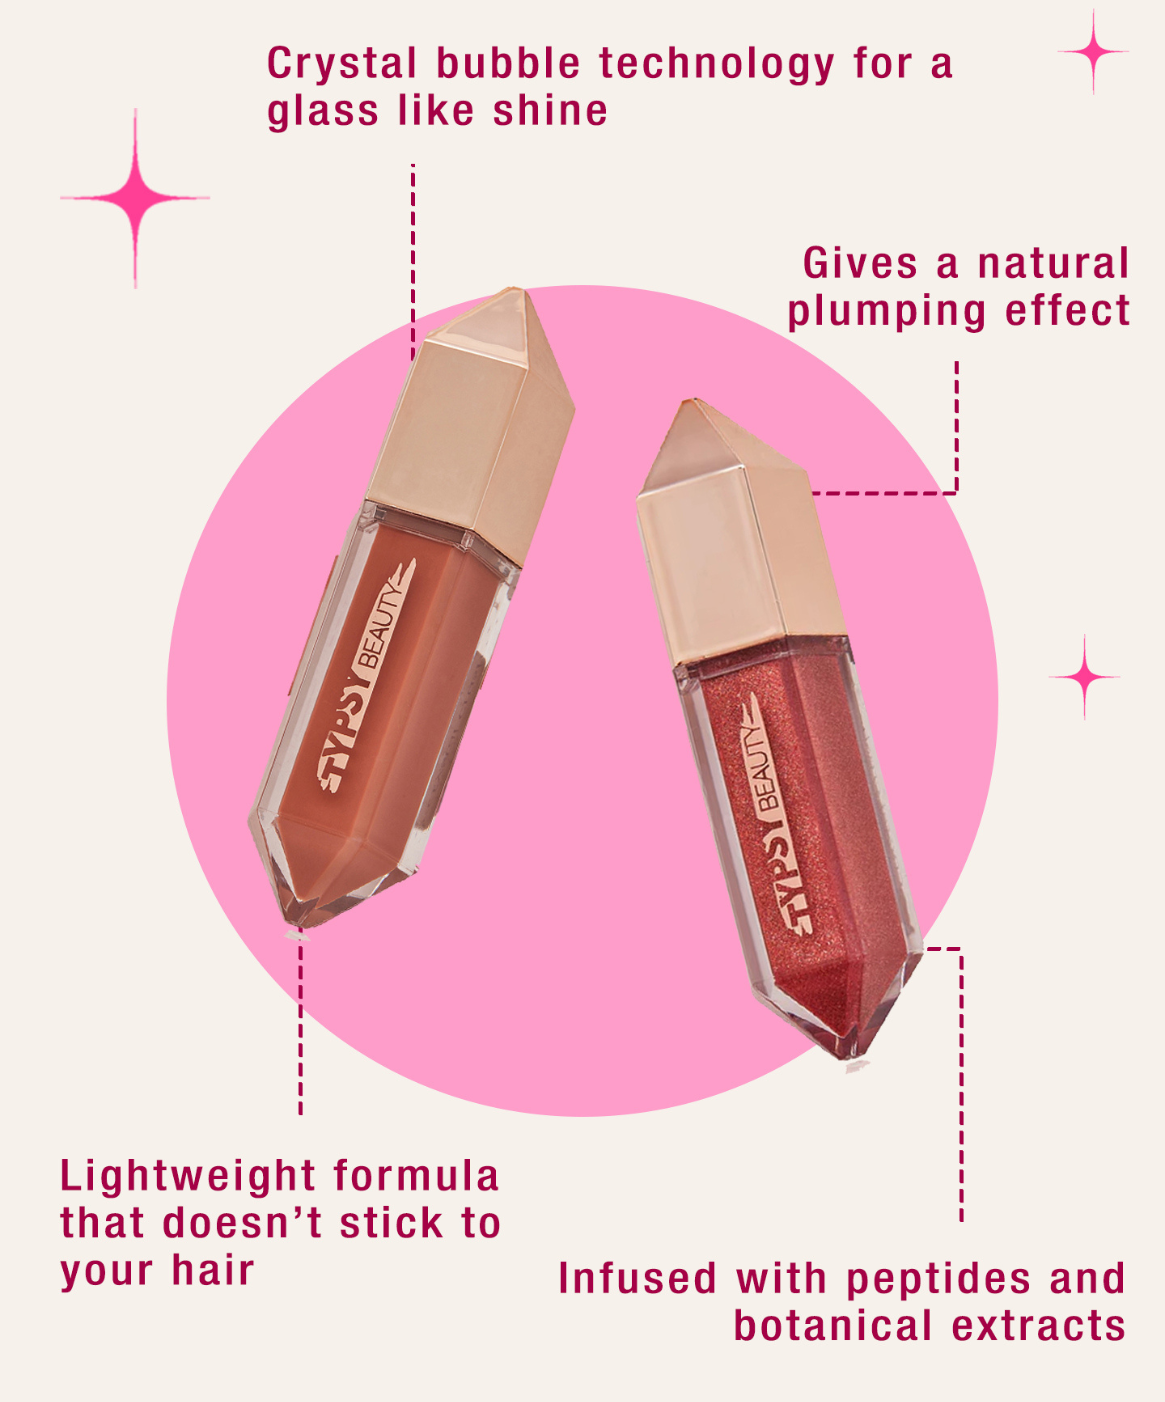 Buy Crystal Crush Plumping Lip Gloss Online at Best Price